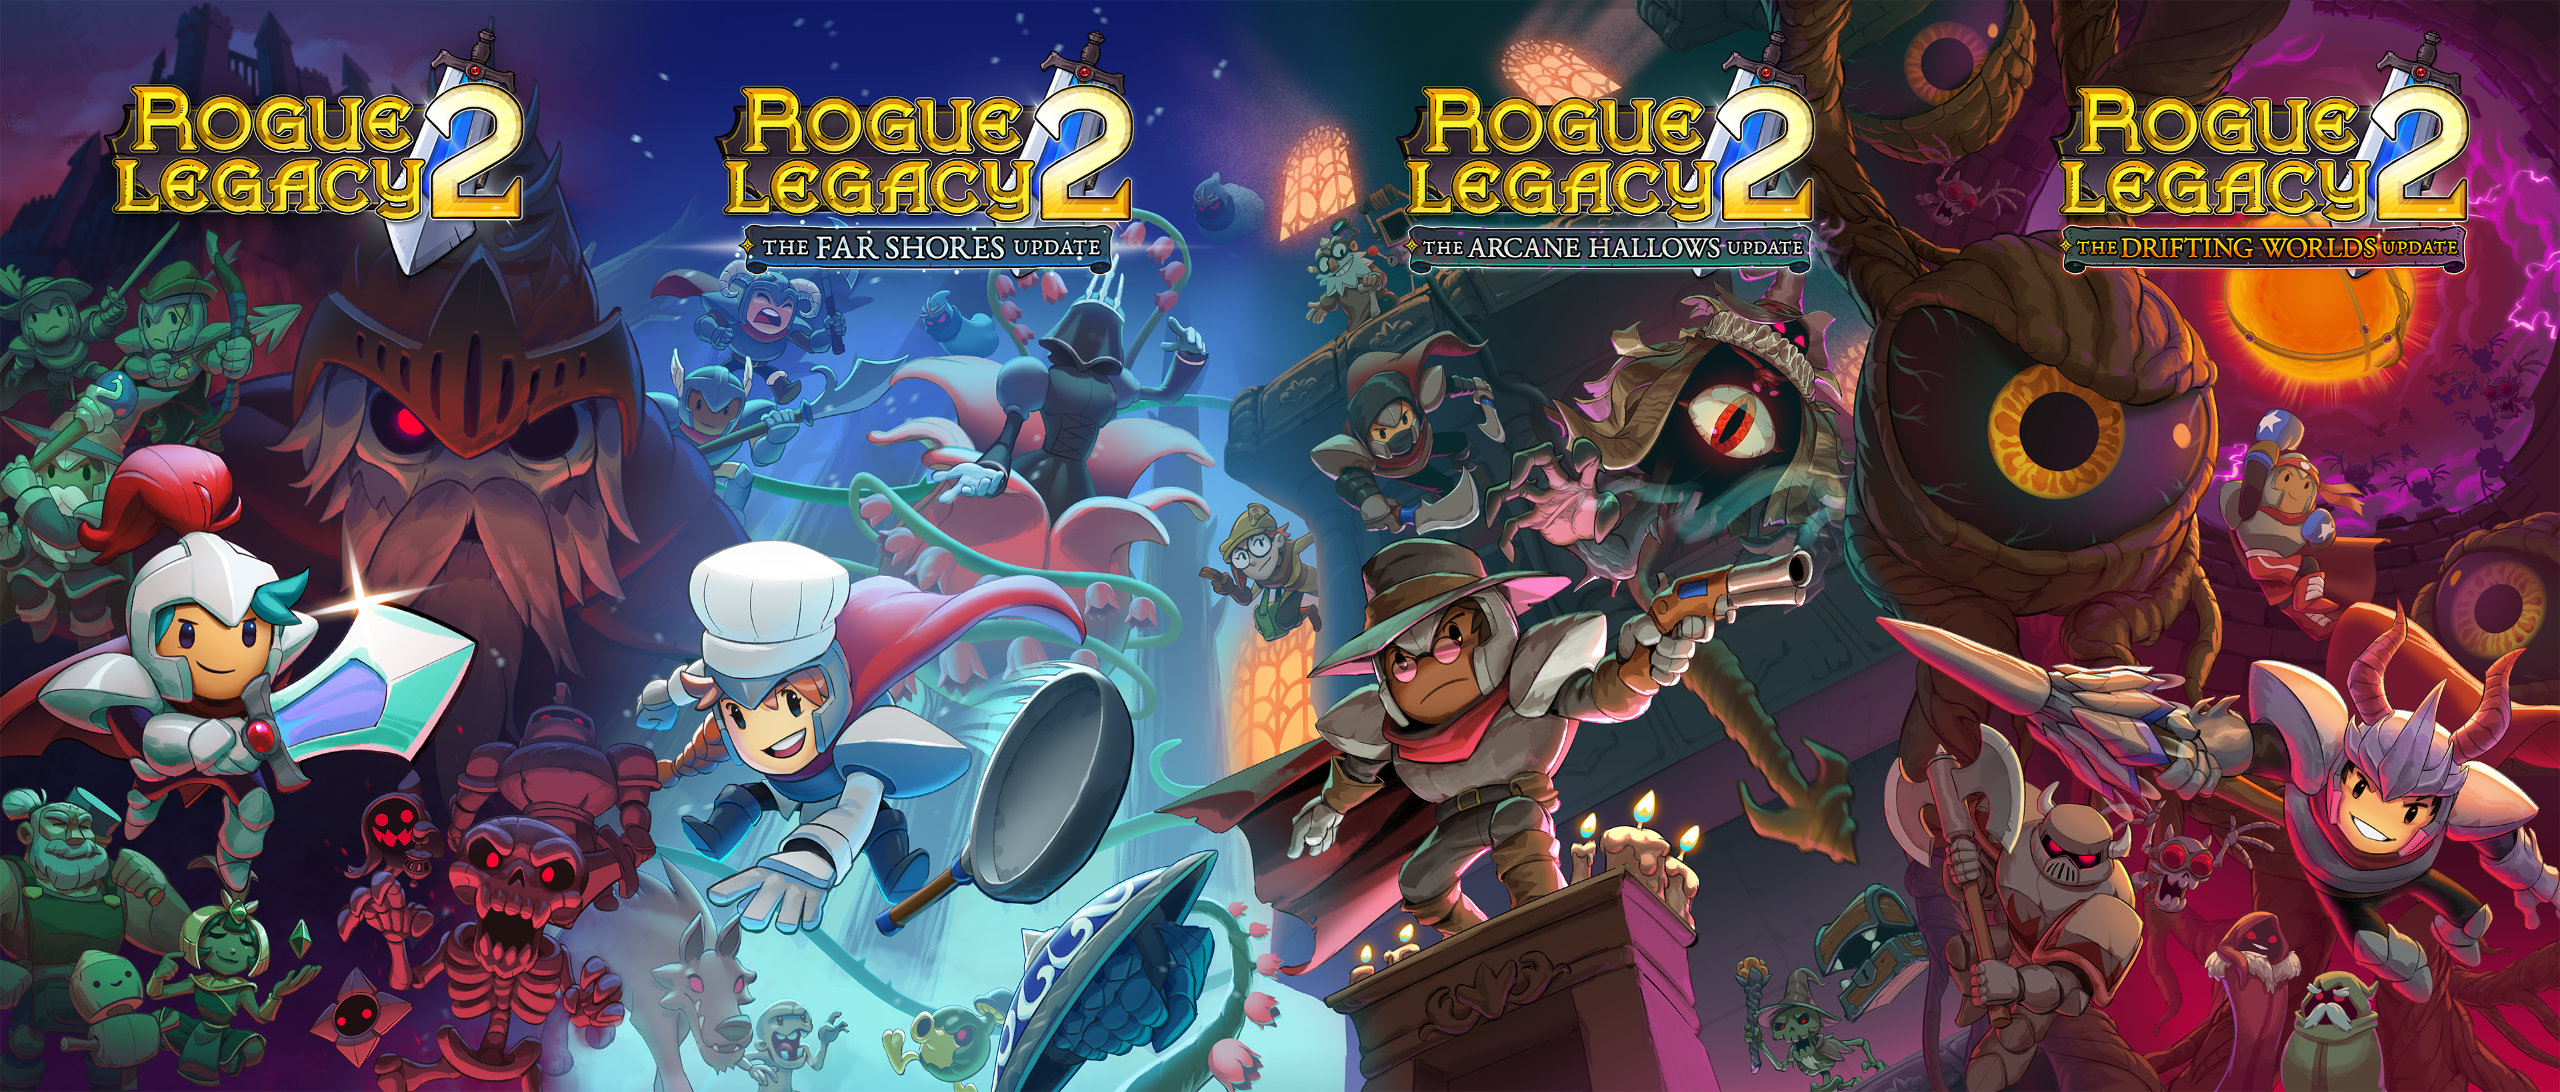 Rogue legacy not on steam фото 69